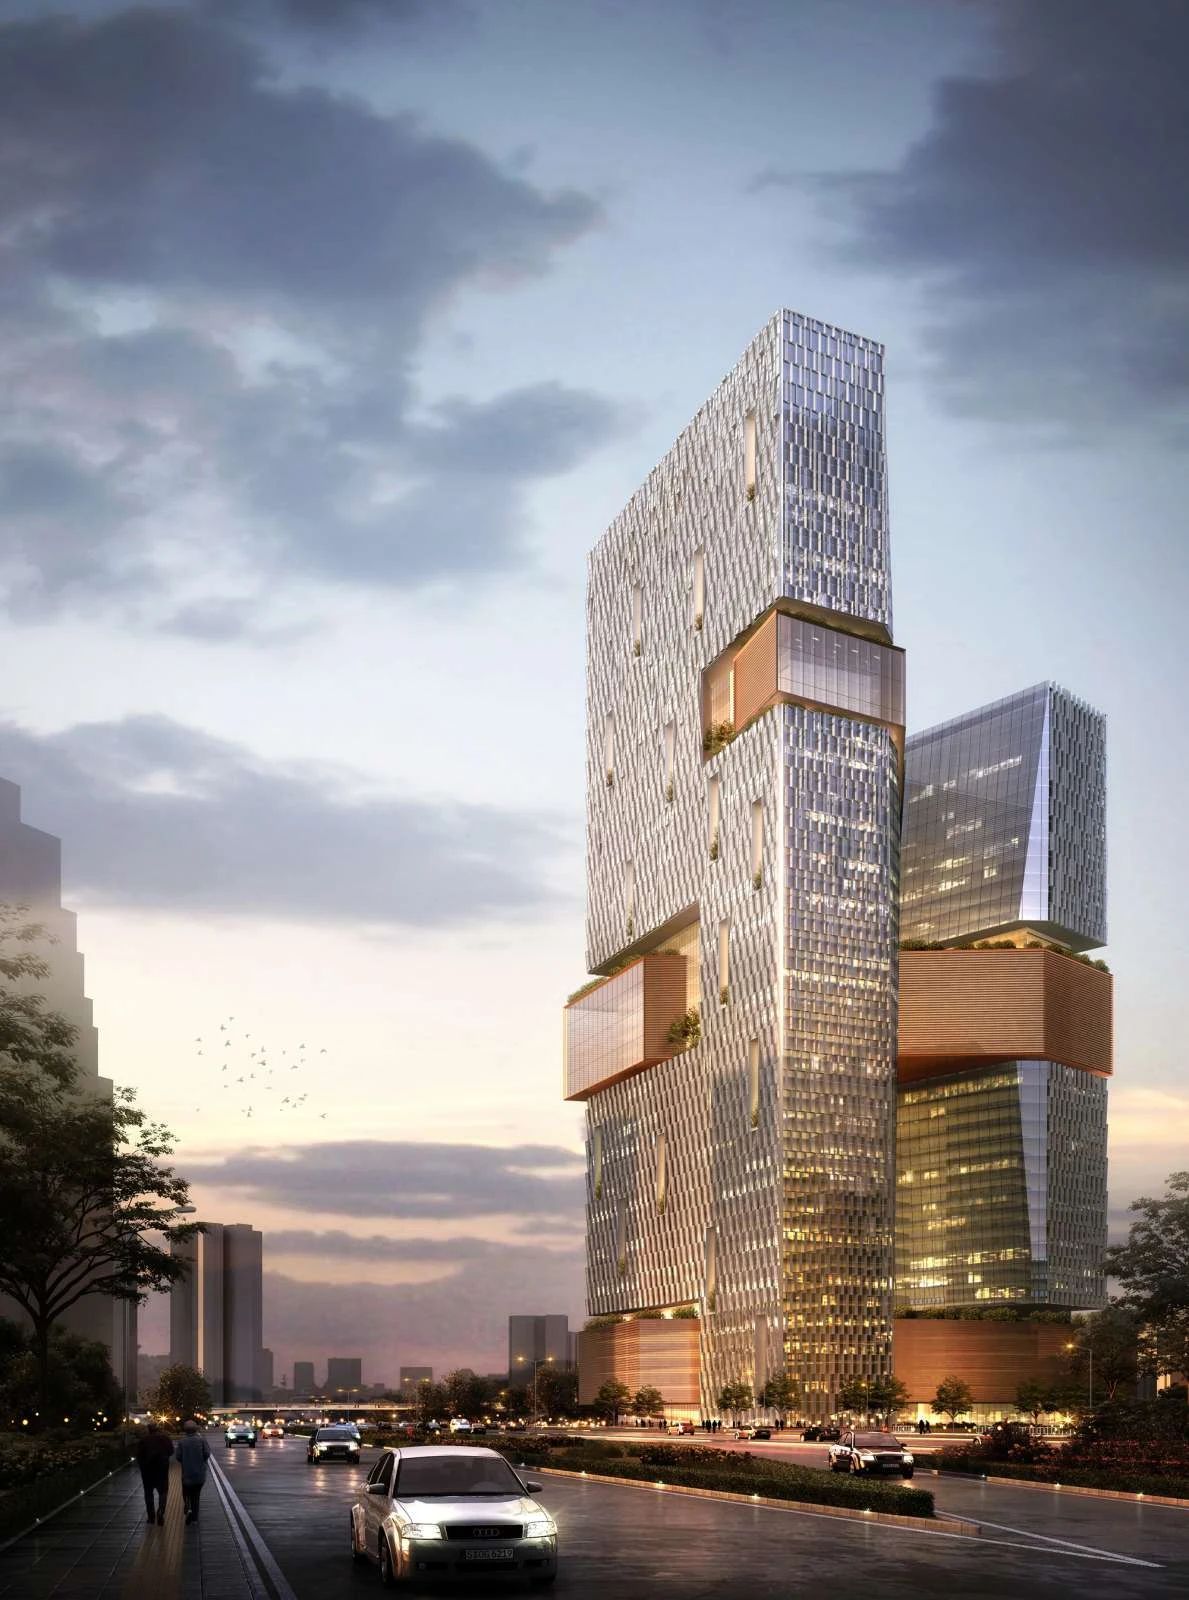 Tencent Corporate Headquarters by Nbbj